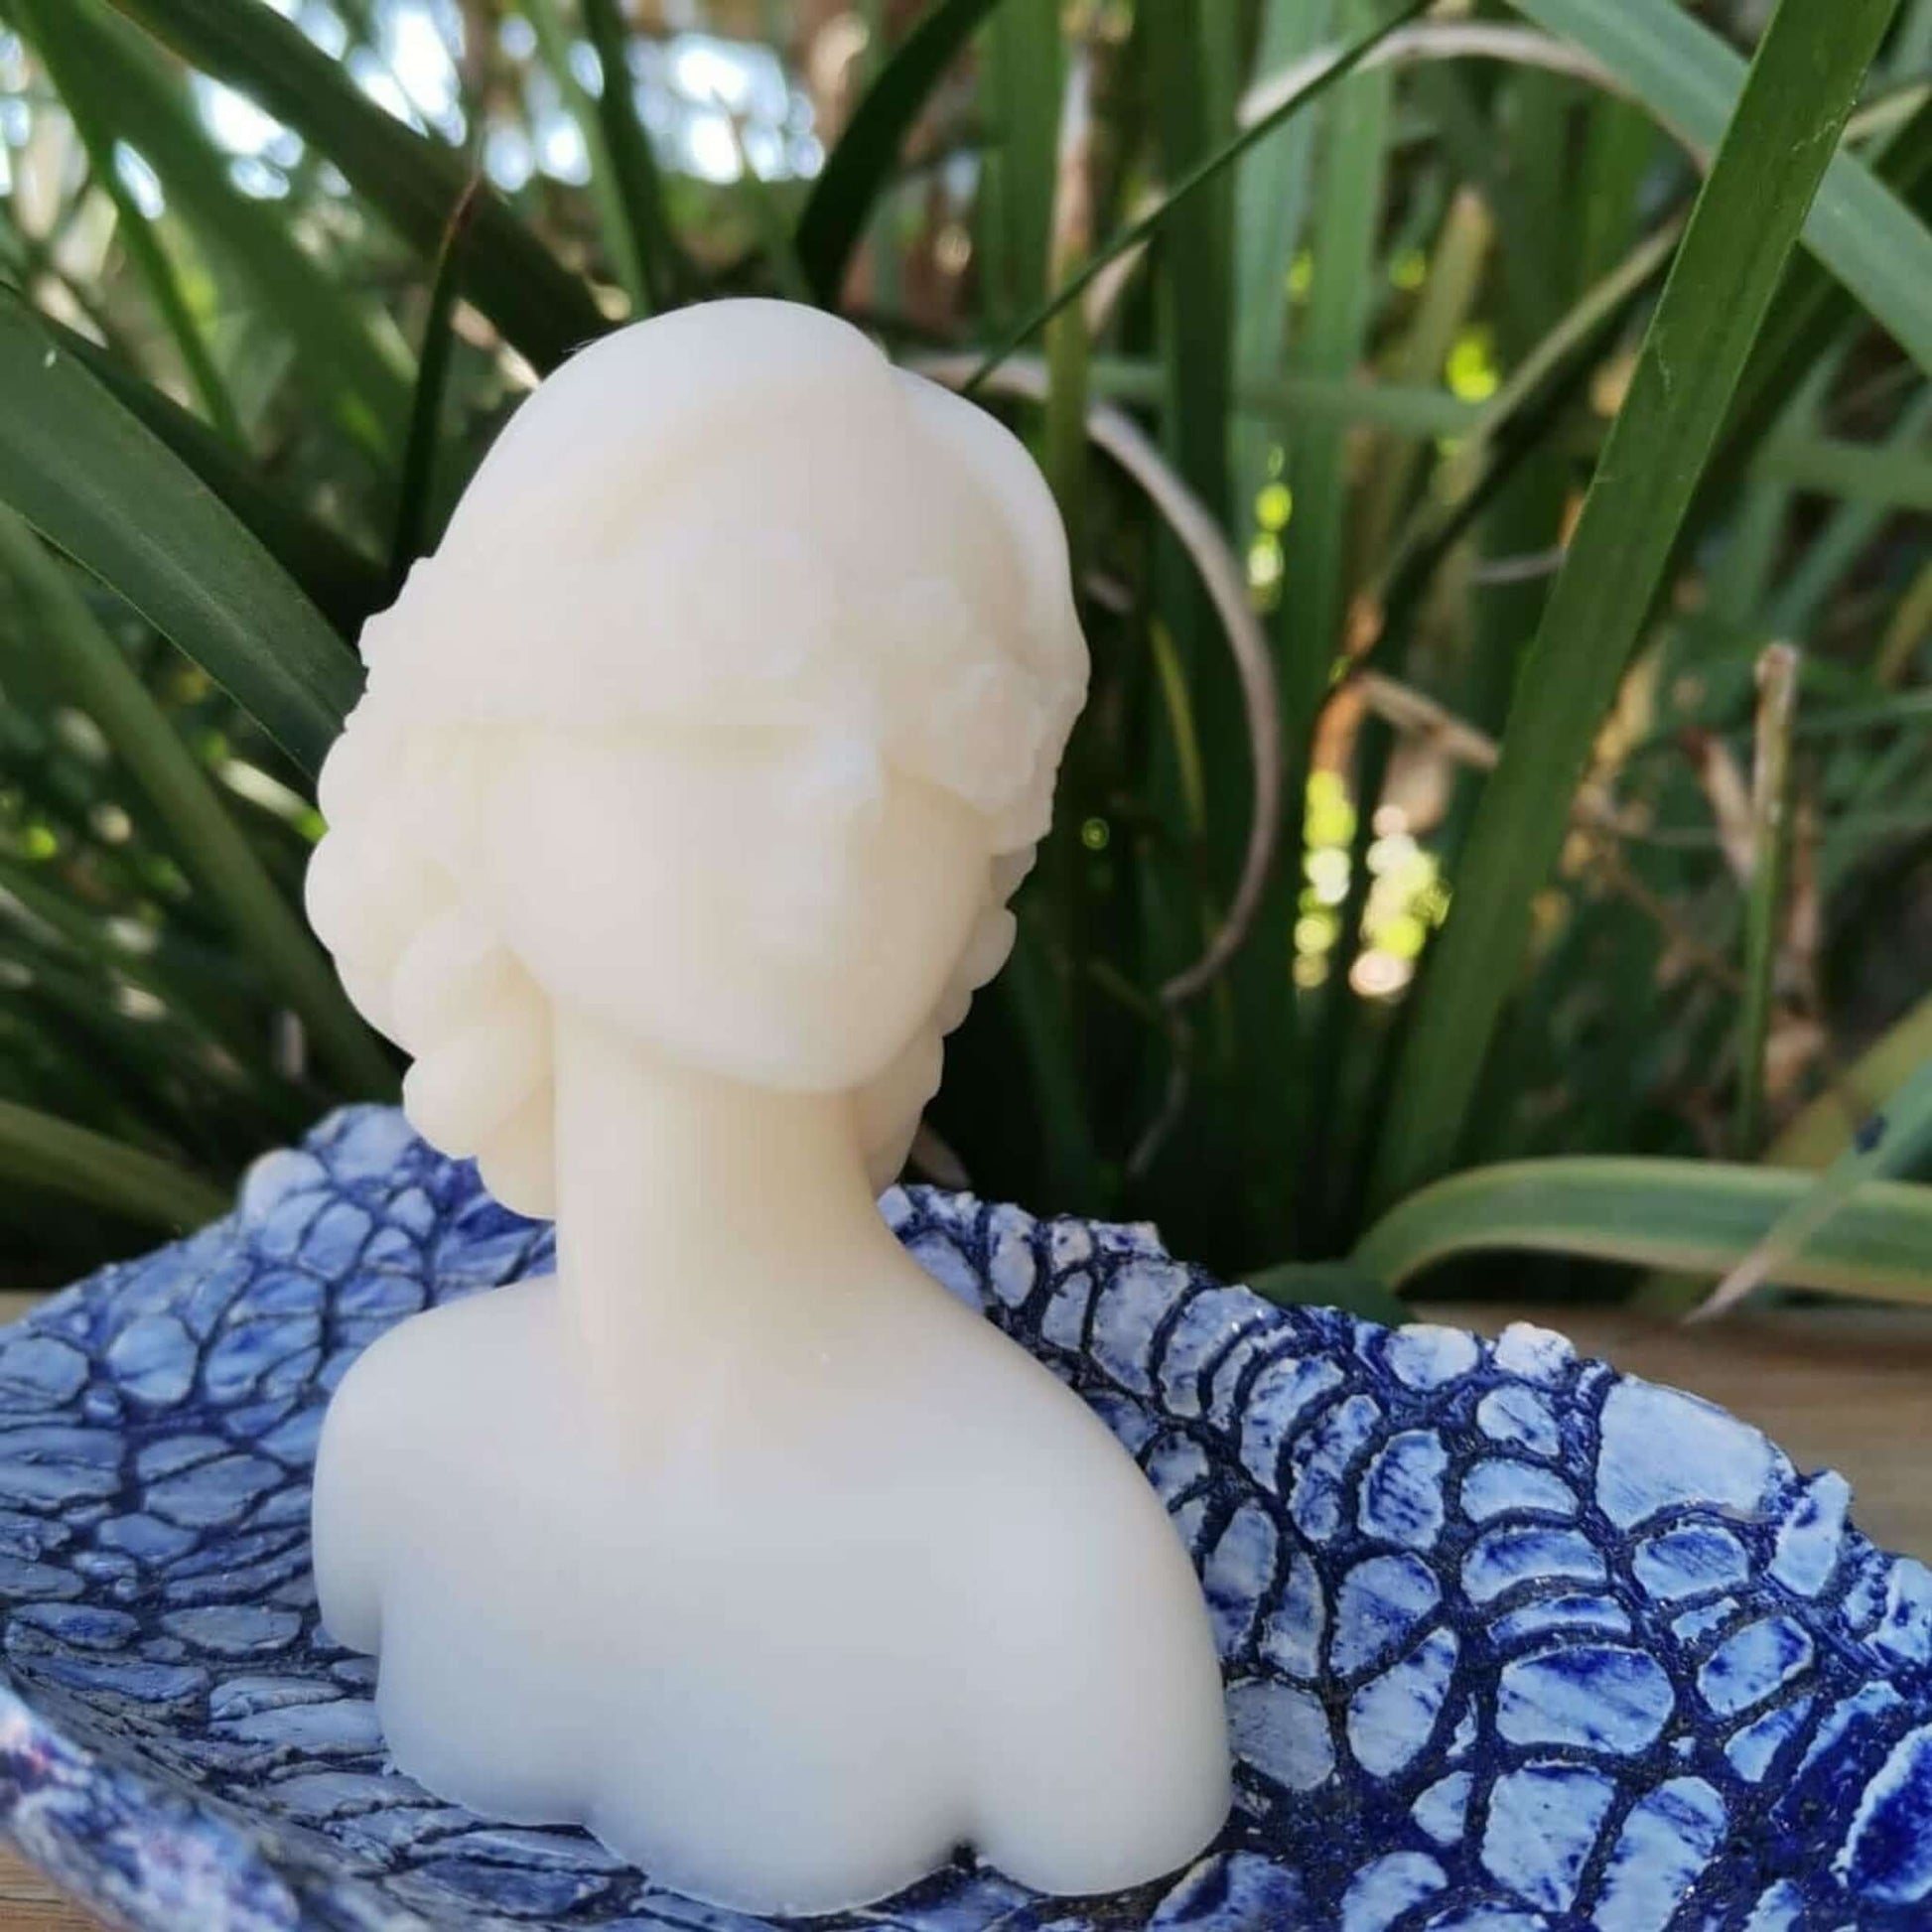 JUSTBLISS: SOAP BAR: simply woman (with crown flowers over eyes)